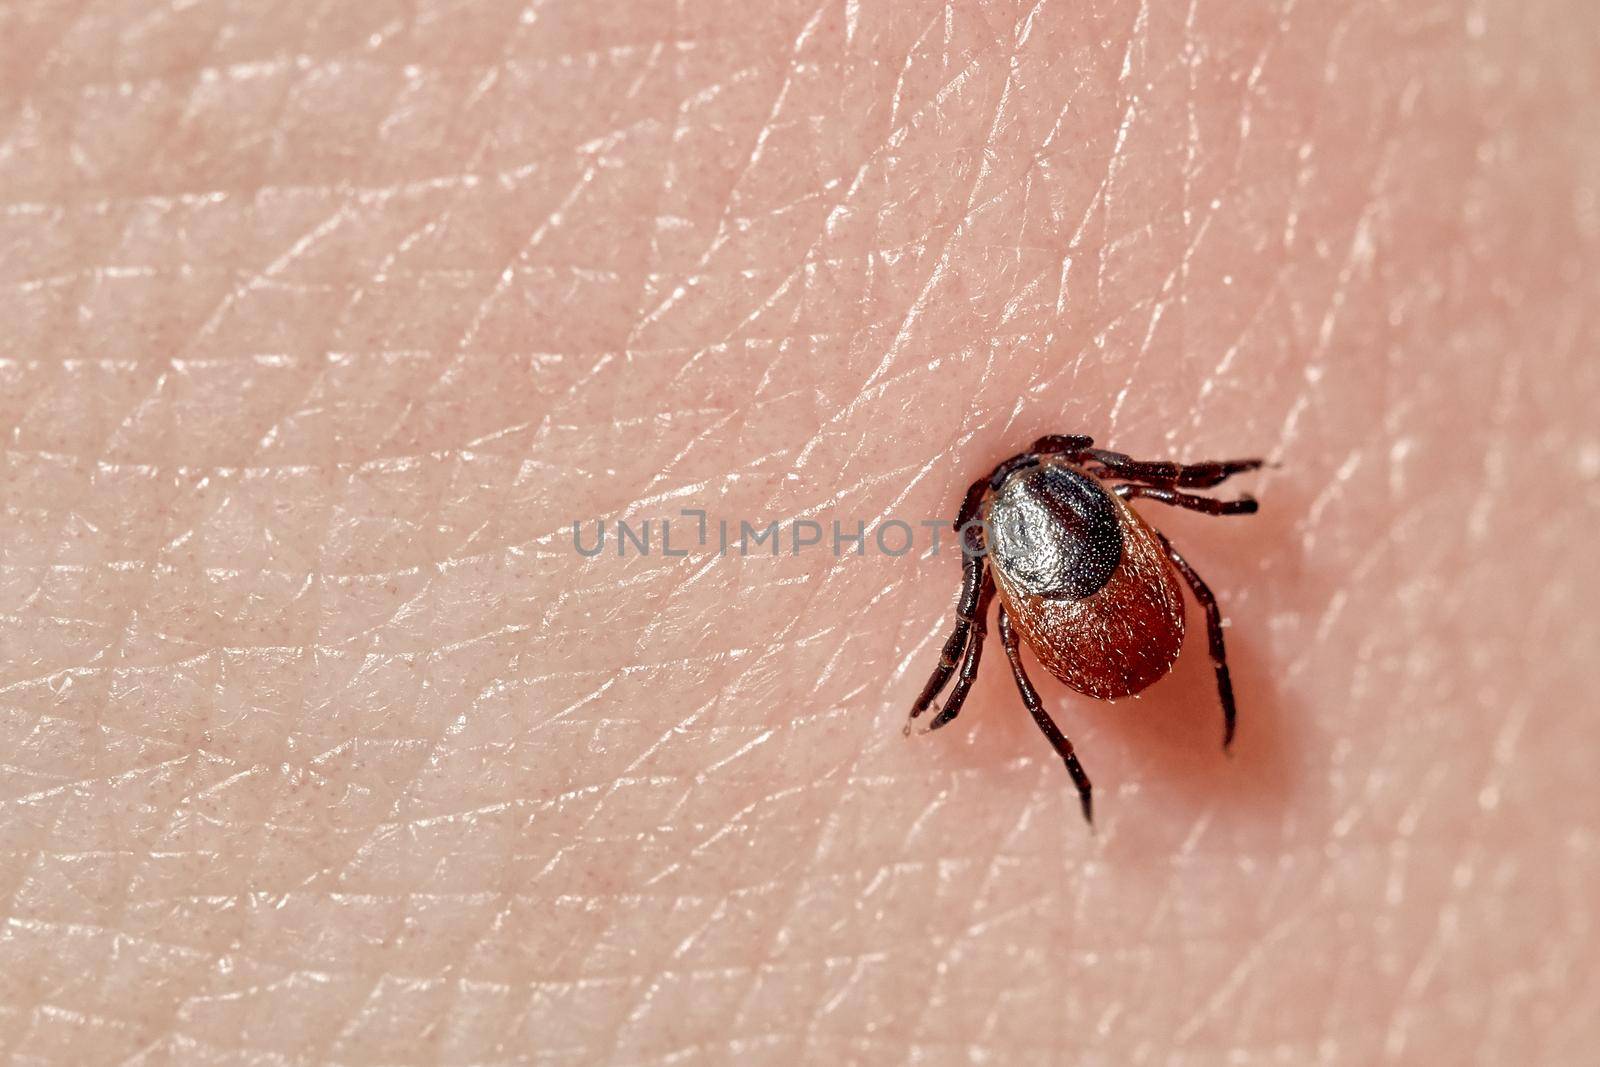 Sucking tick Macro photo on human skin. Ixodes ricinus. Bloated parasite bitten into pink irritated epidermis. Small red drops. Dangerous insect mite. Encephalitis, Lyme disease infection.